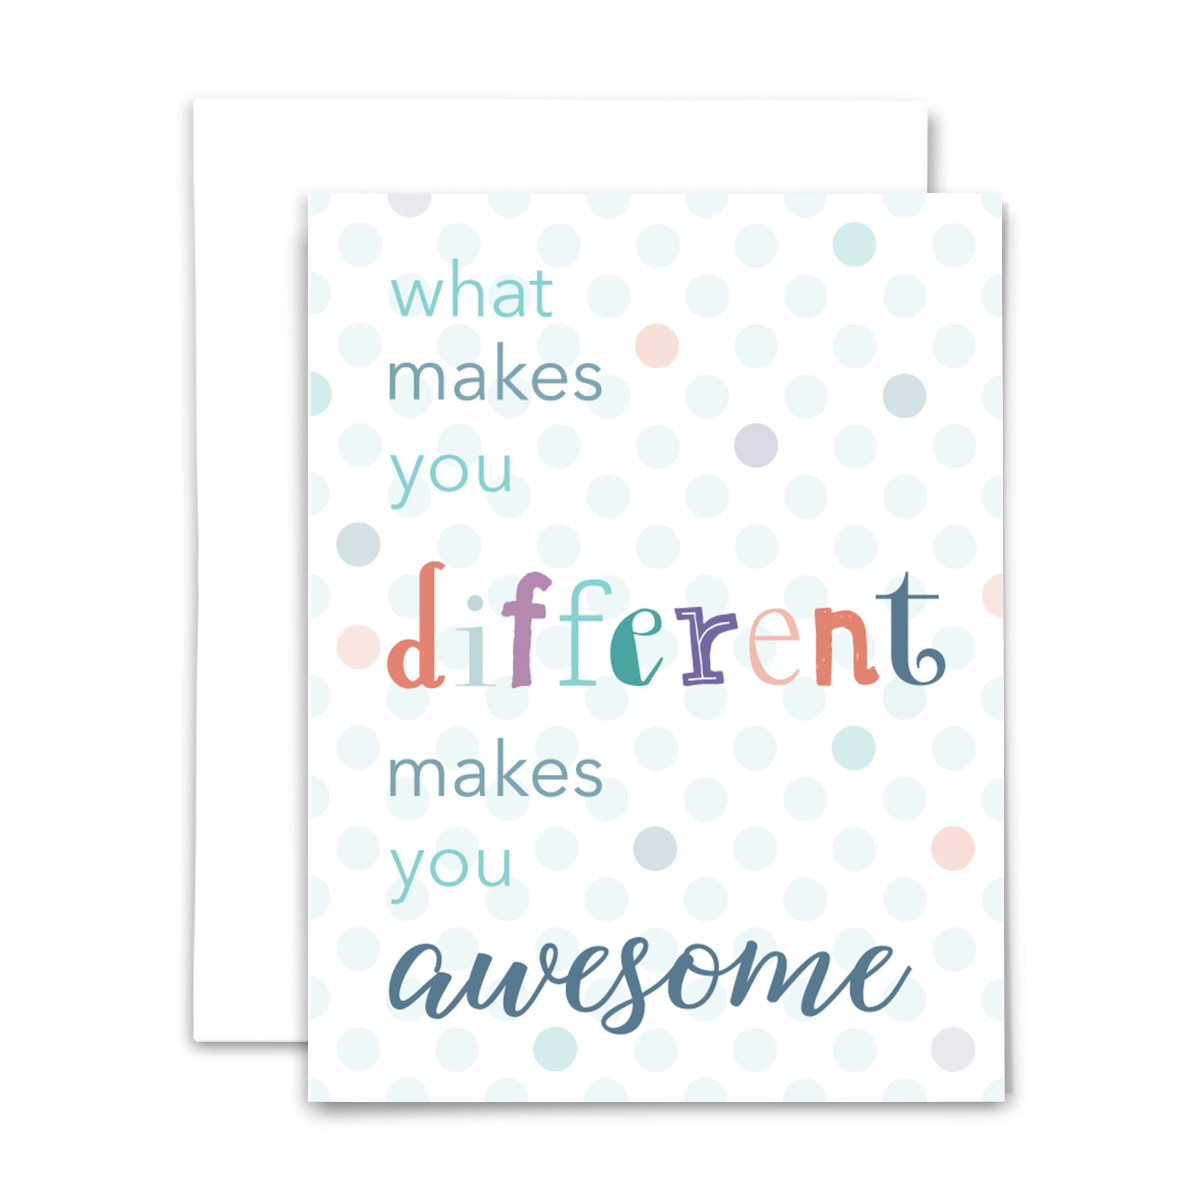 "what makes you different makes you awesome" blank greeting card; blue, teal, coral and purple lettering and polka dots on white background; with white envelope